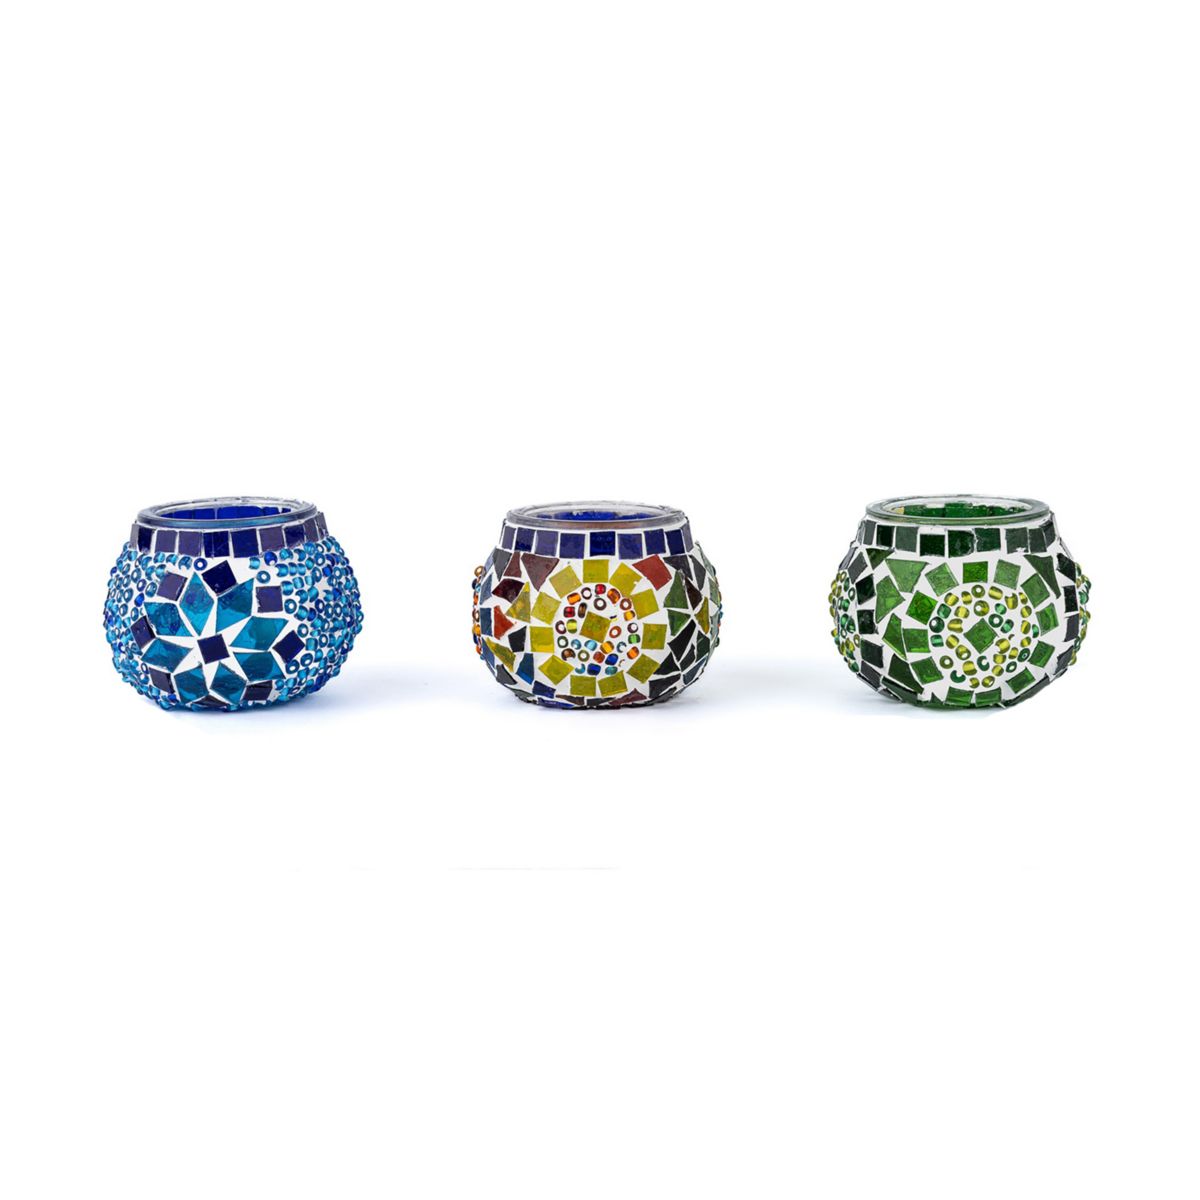 2.4 in. Handmade Blue and Green and Multicolor Mosaic Glass Tealight Candle Holder (Set of 3) Kafthan